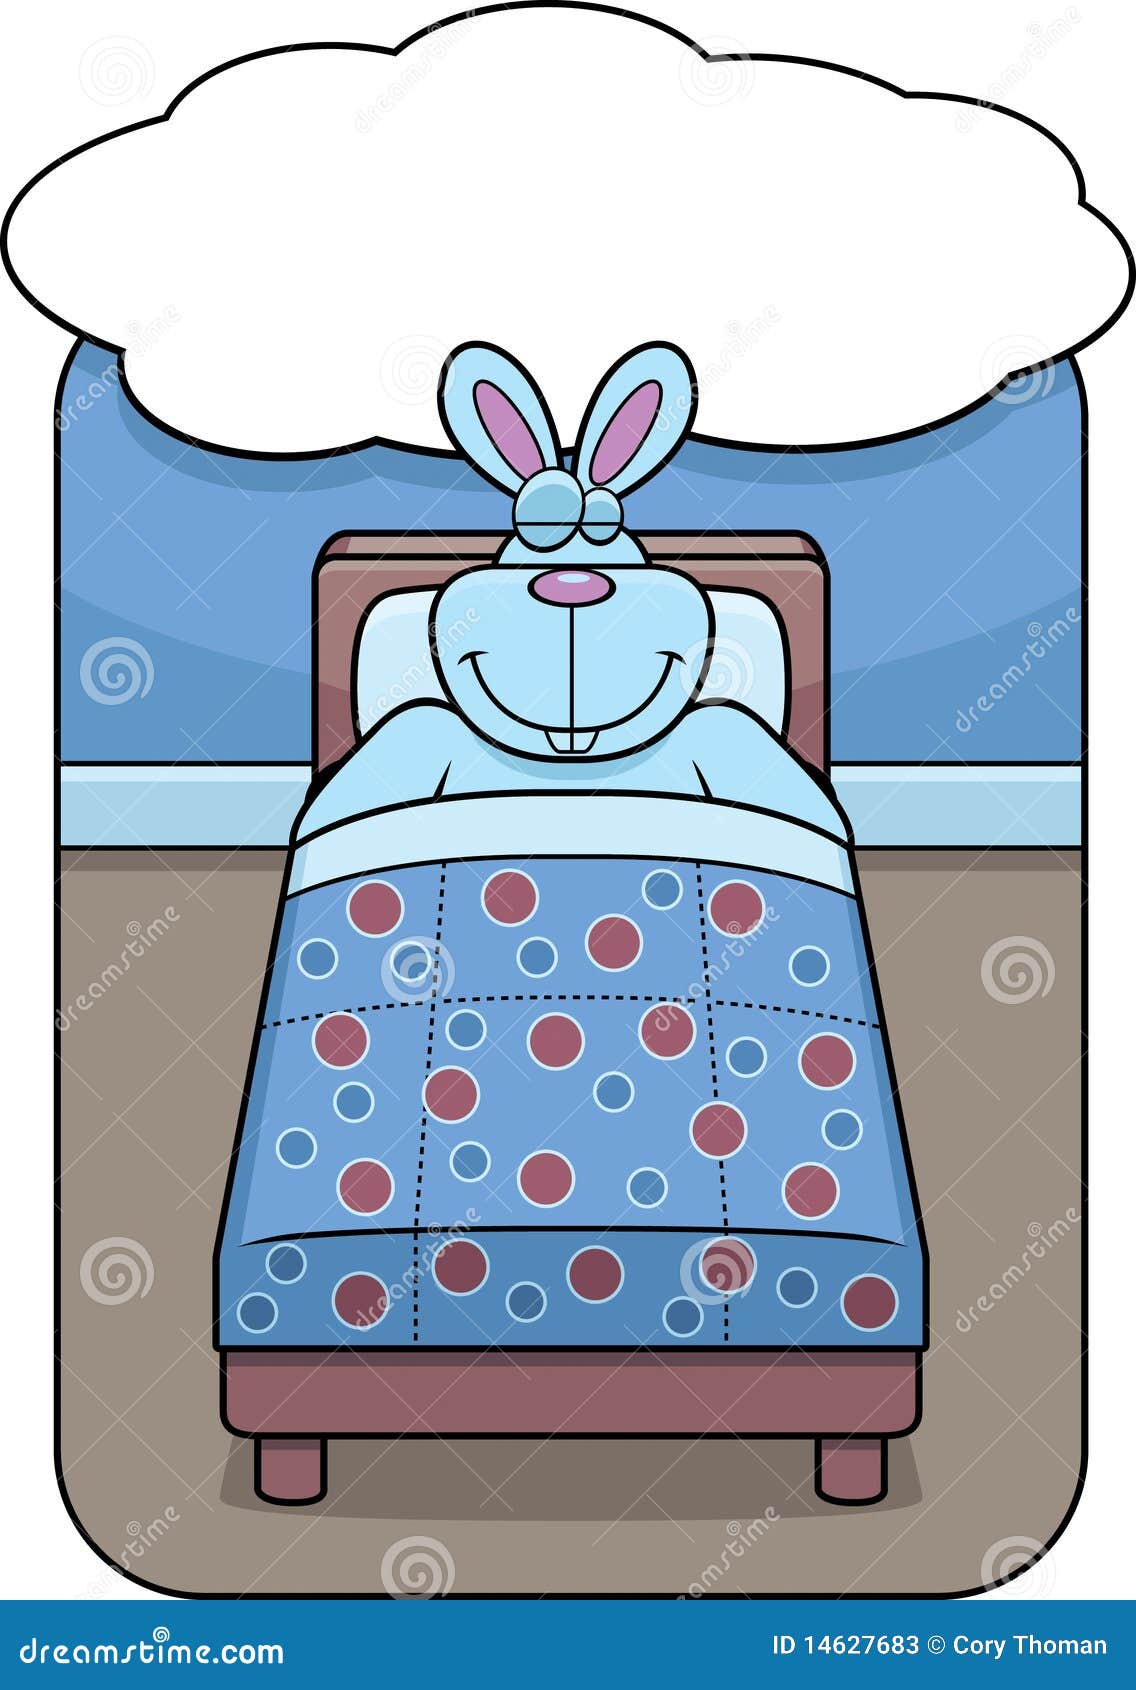 cartoon rabbit in bed dreaming and smiling.